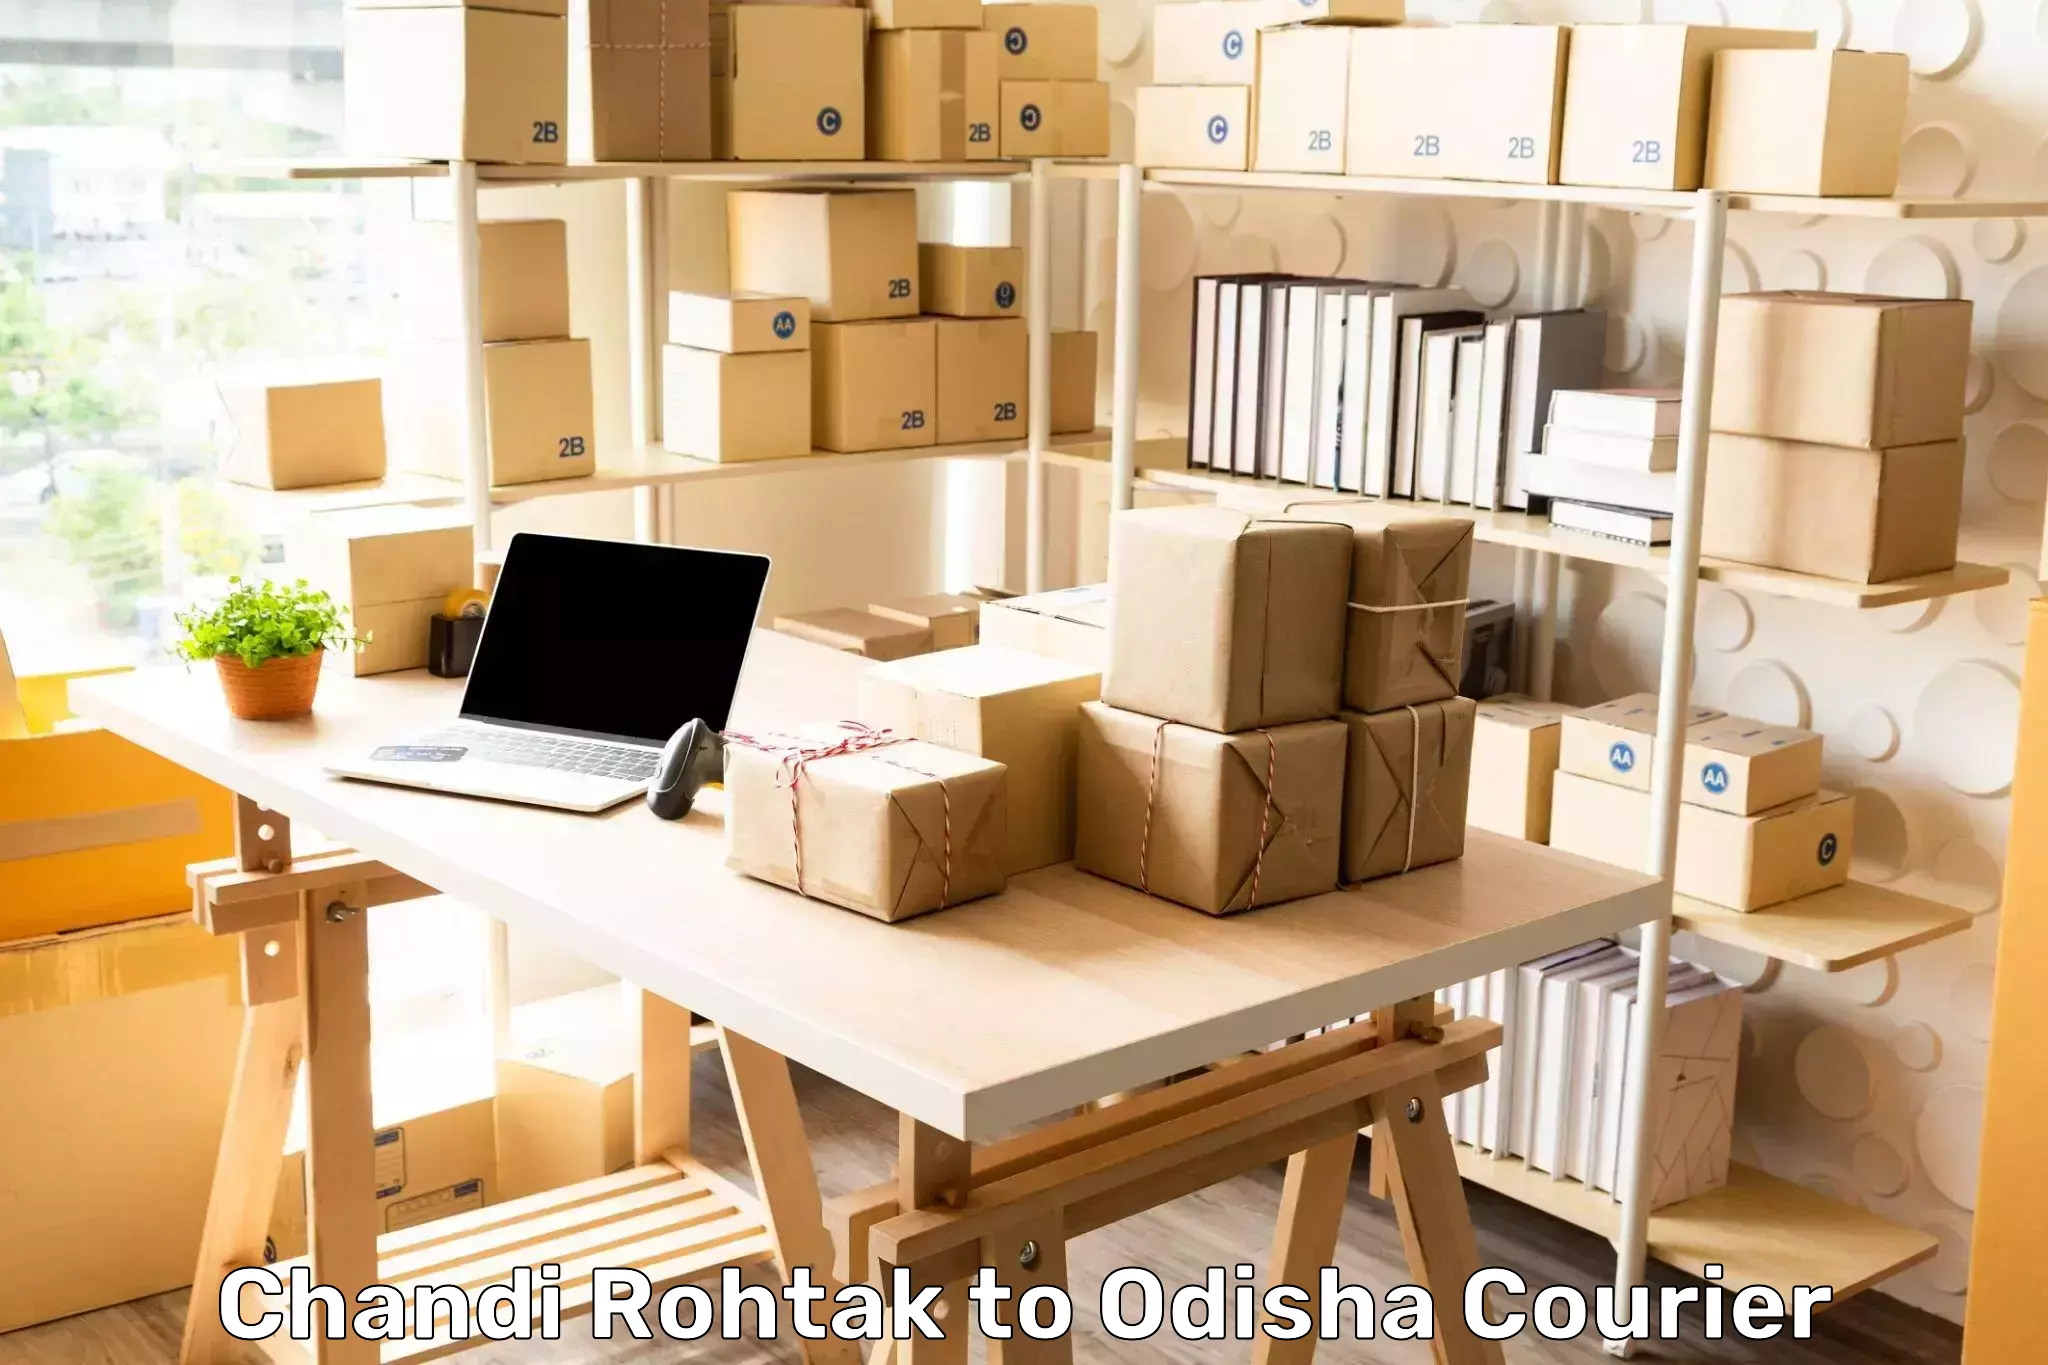 Express package services Chandi Rohtak to Mohana